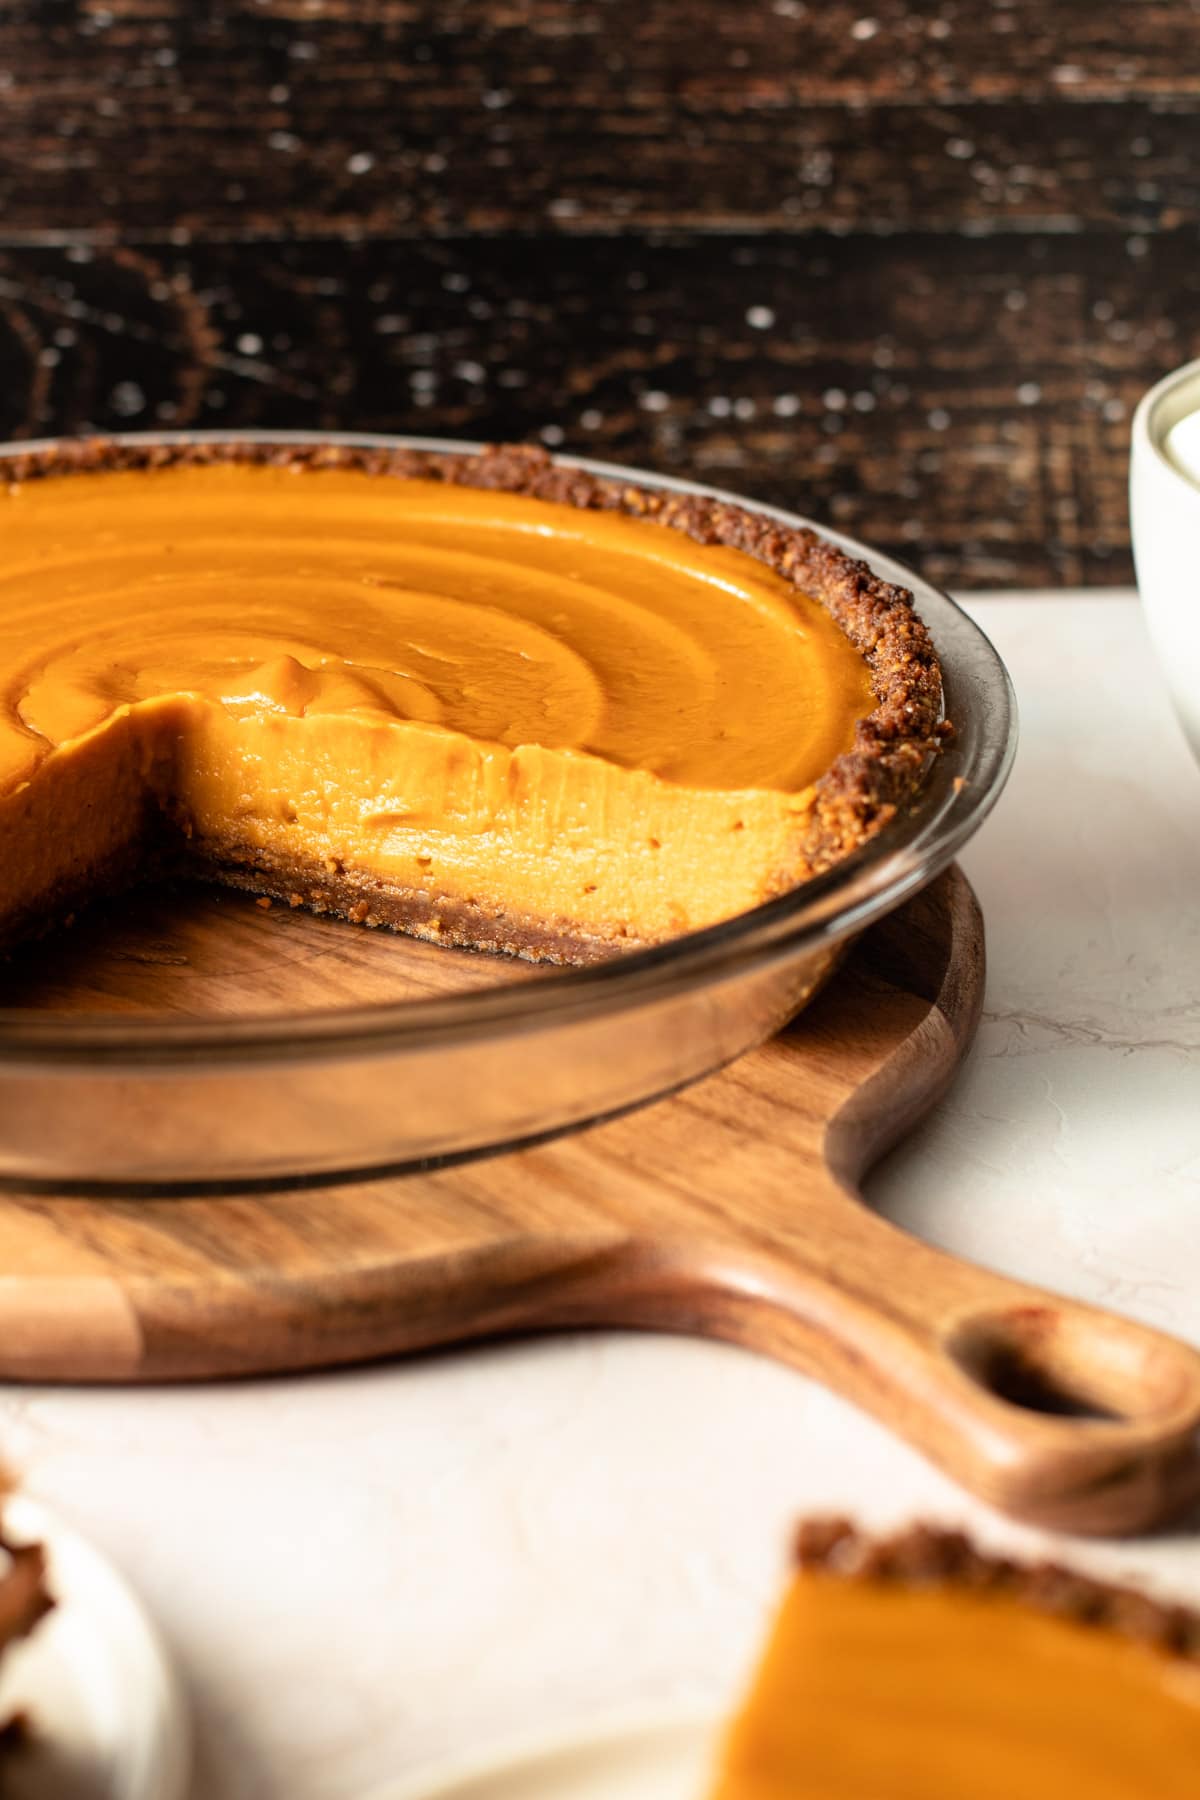 Sweet potato pie with a slice cut out to reveal the creamy center.